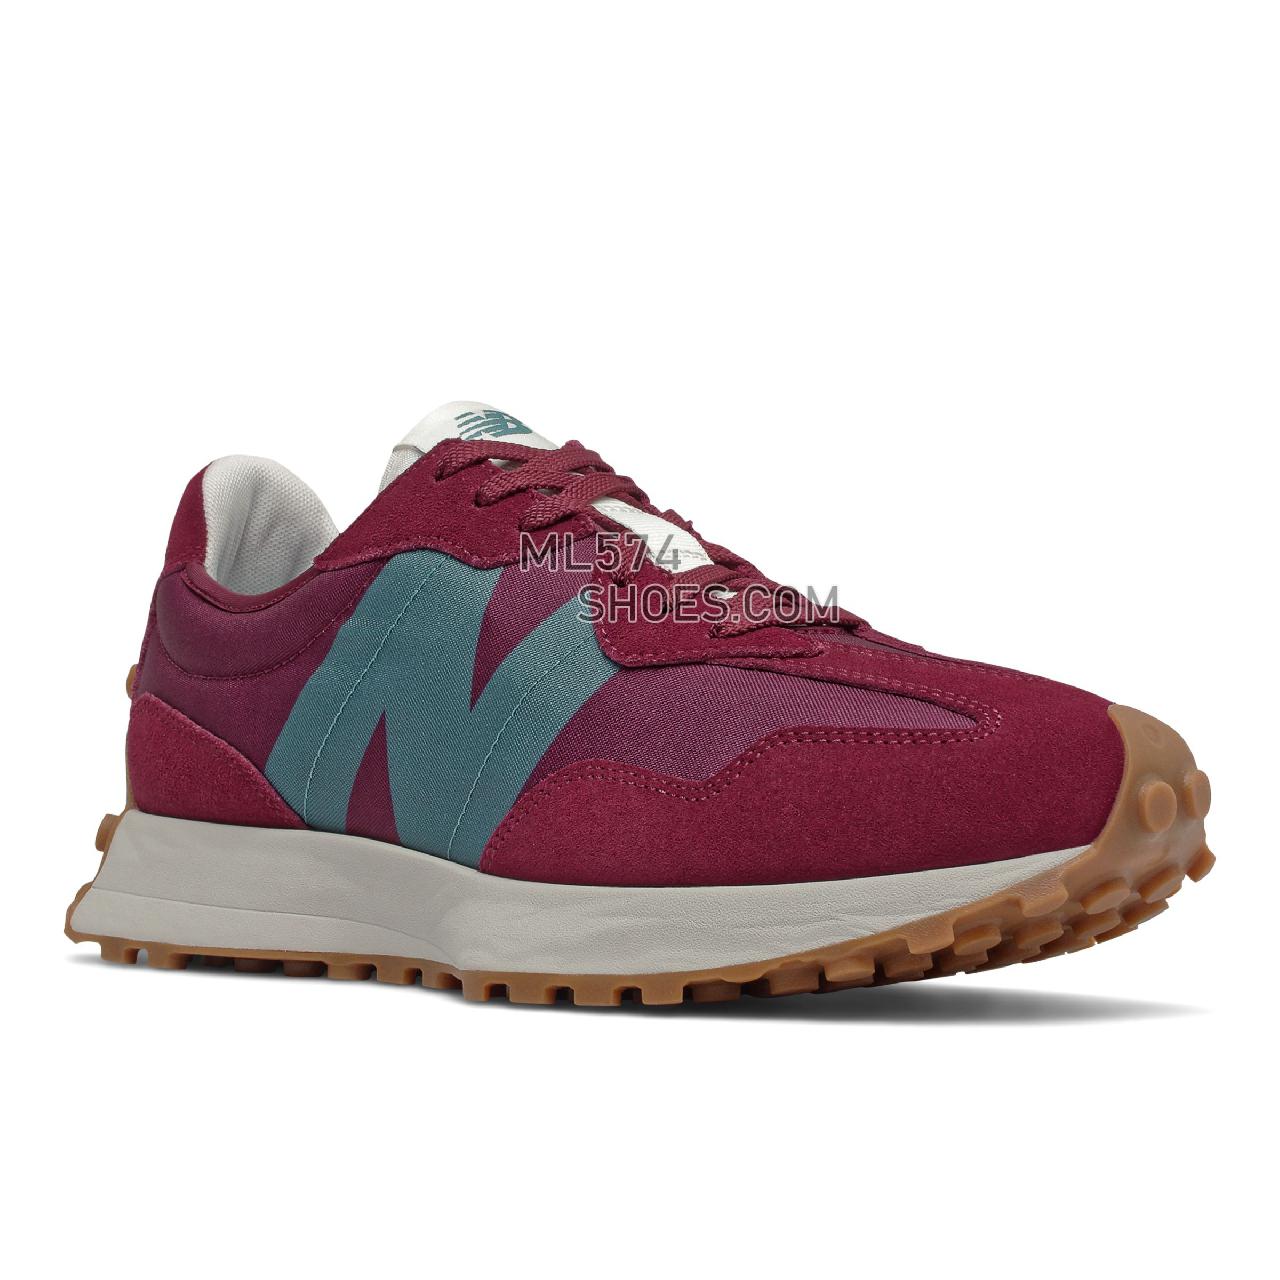 New Balance 327 - Men's Sport Style Sneakers - Garnet with Natural Indigo - MS327HE1